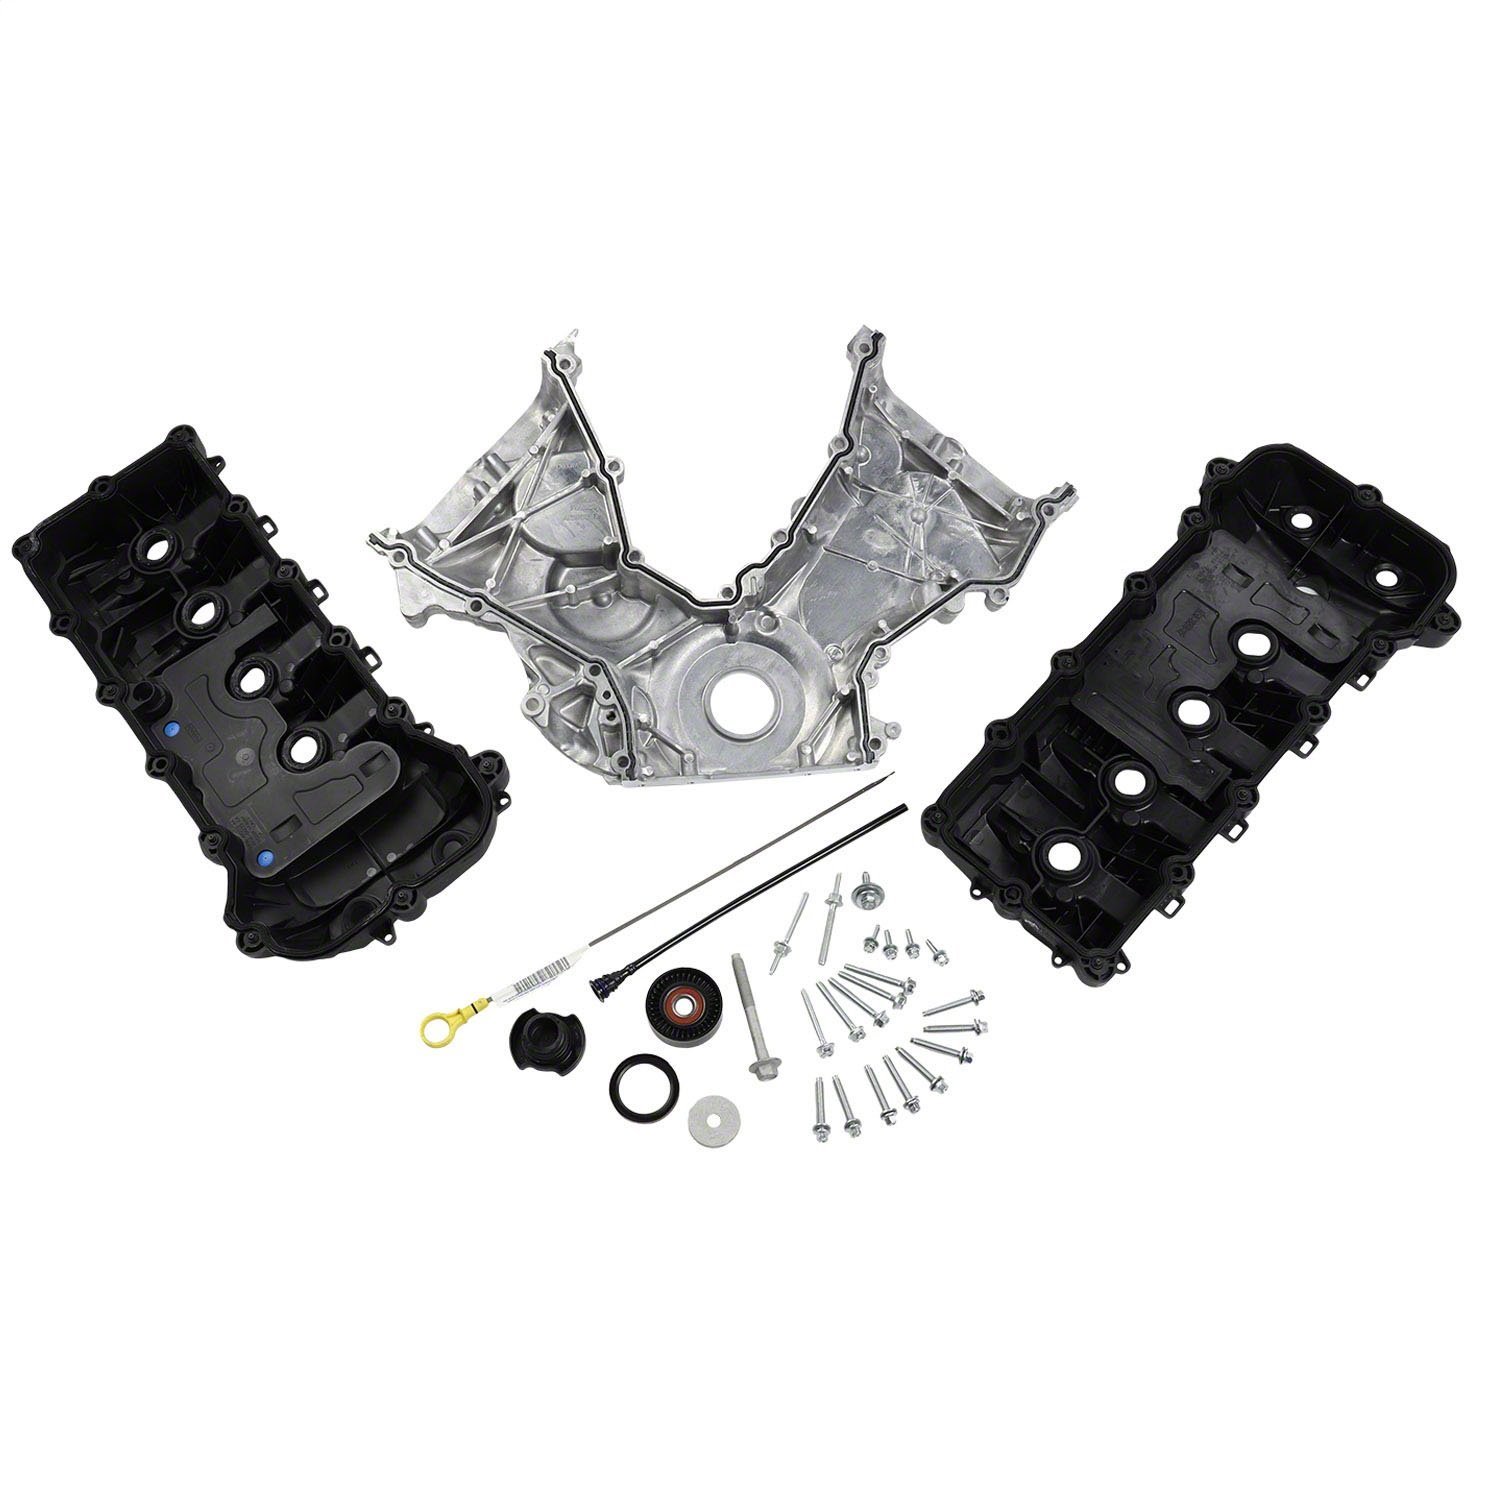 M-6580-M50 Timing & Cam Cover Kit for 2011-2015